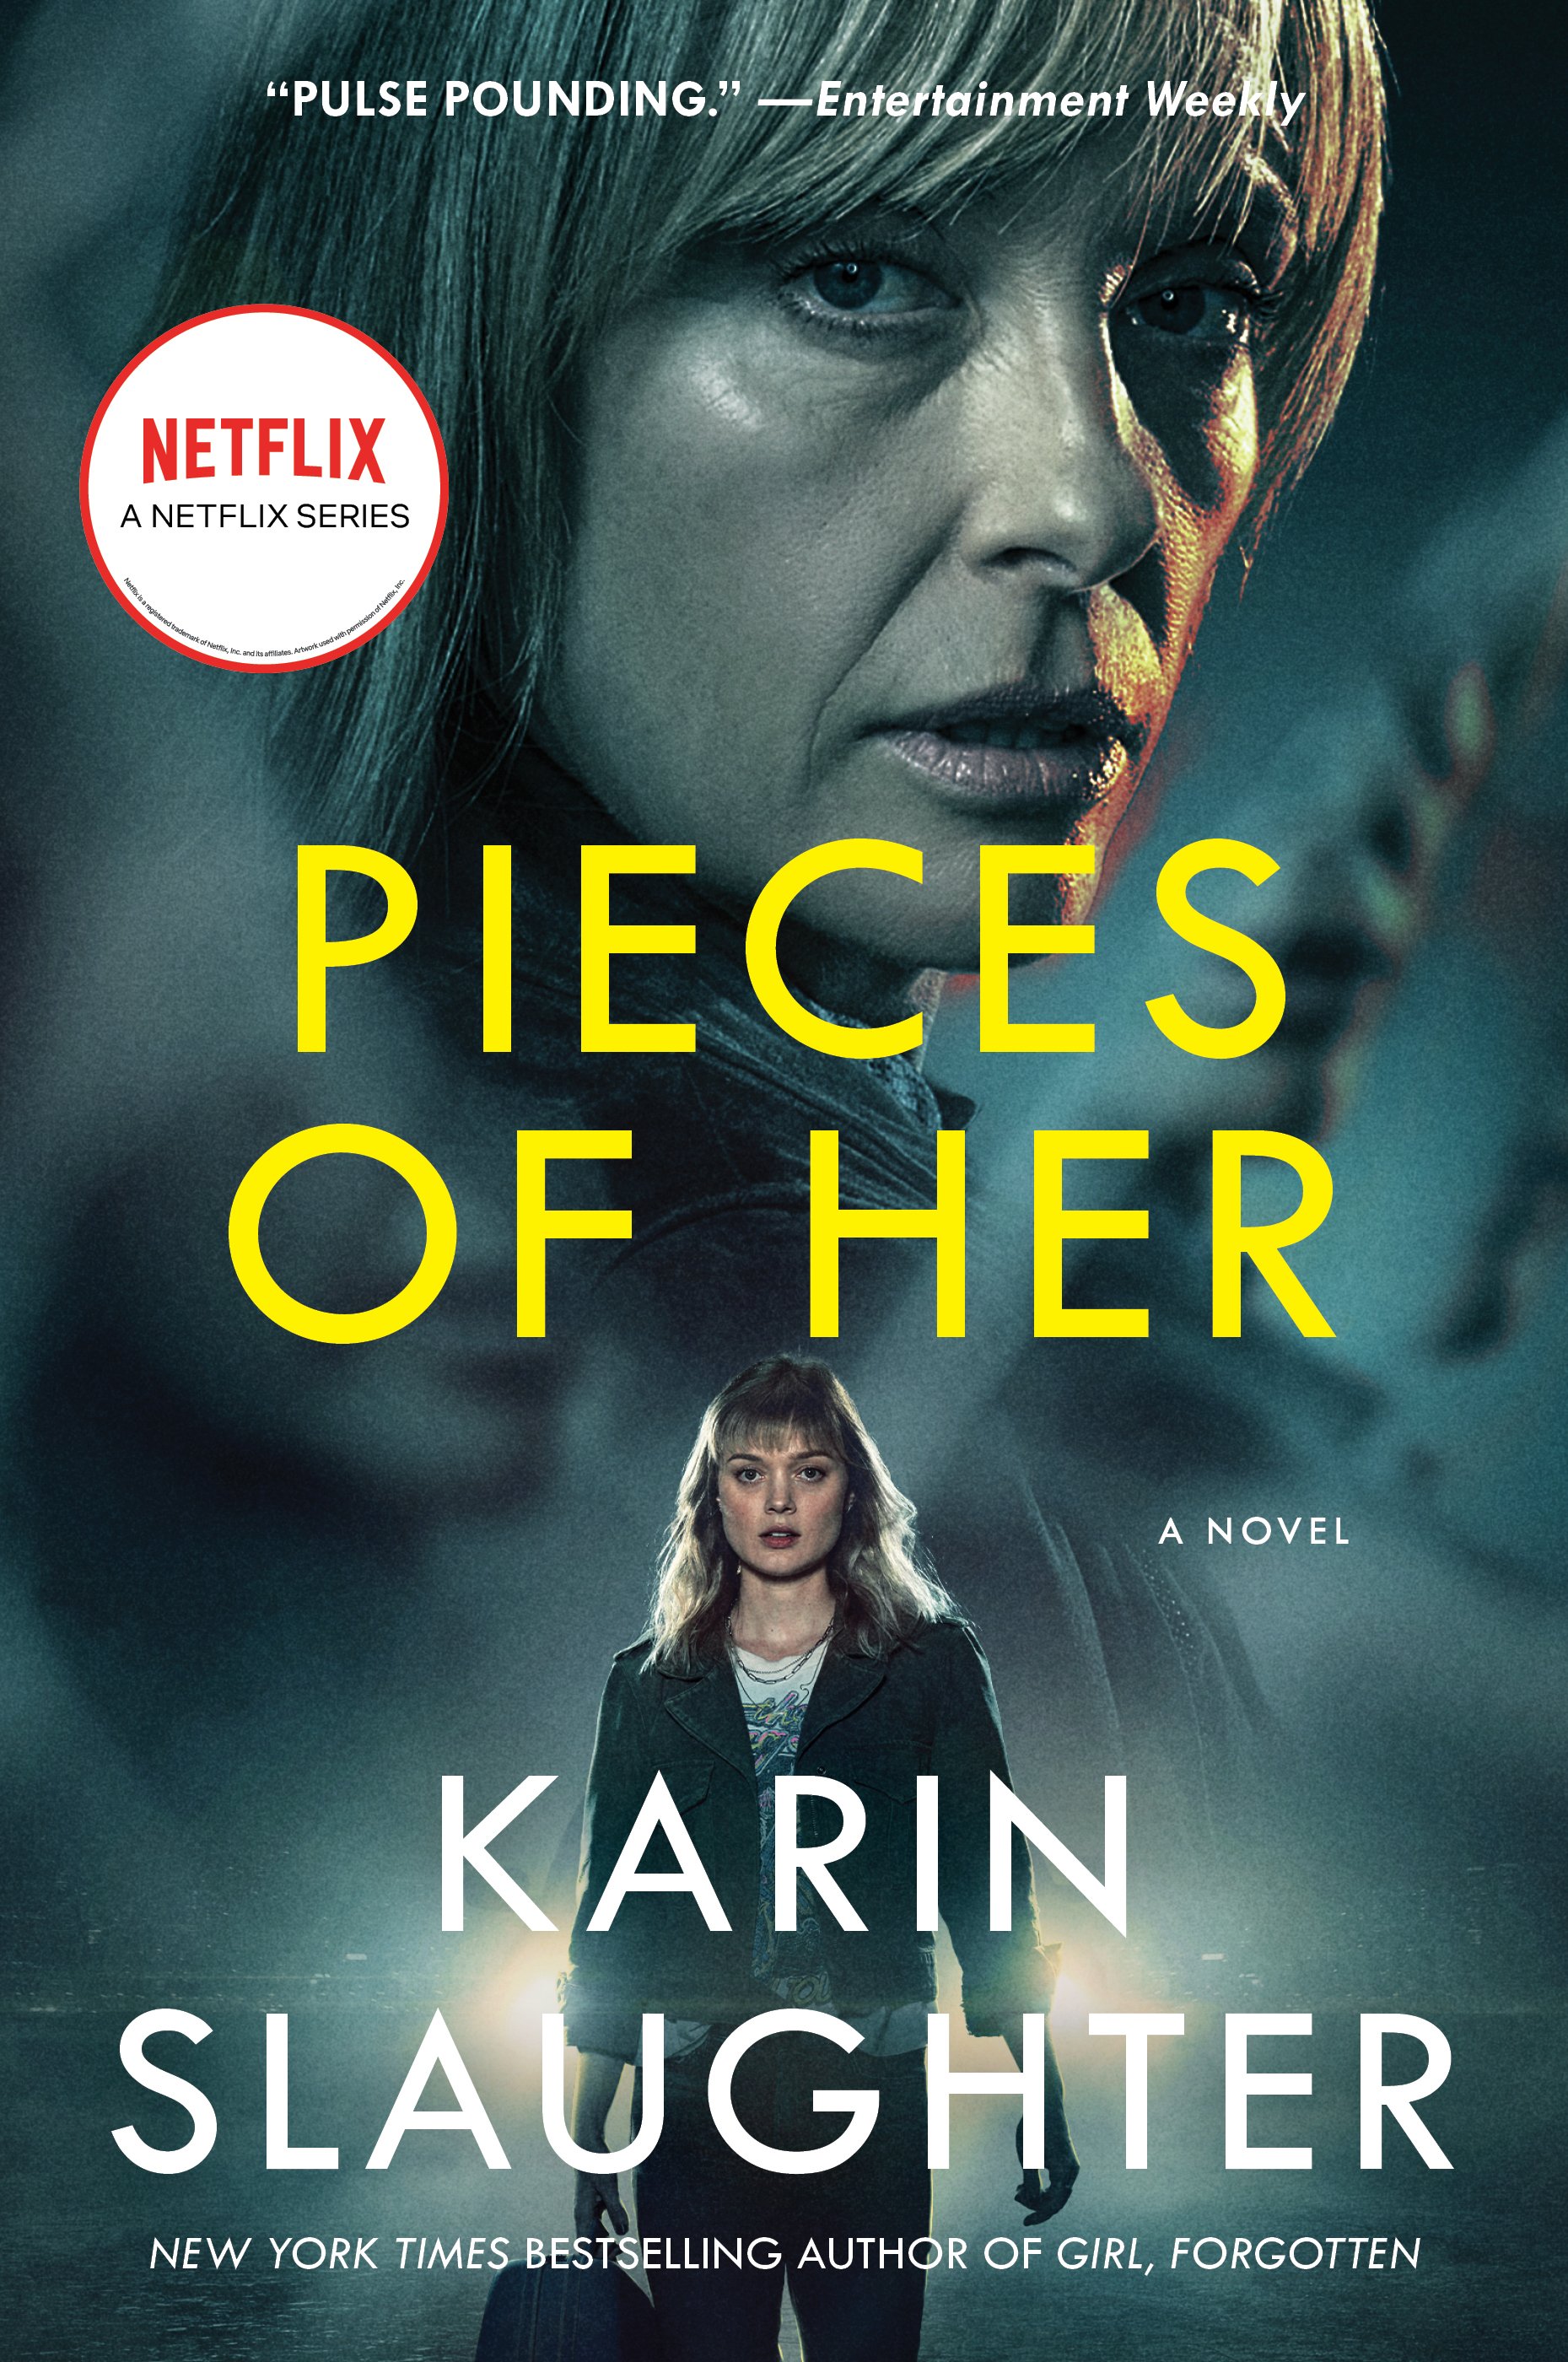 Pieces Of Her Ending Explained: What Was Laura's Secret?